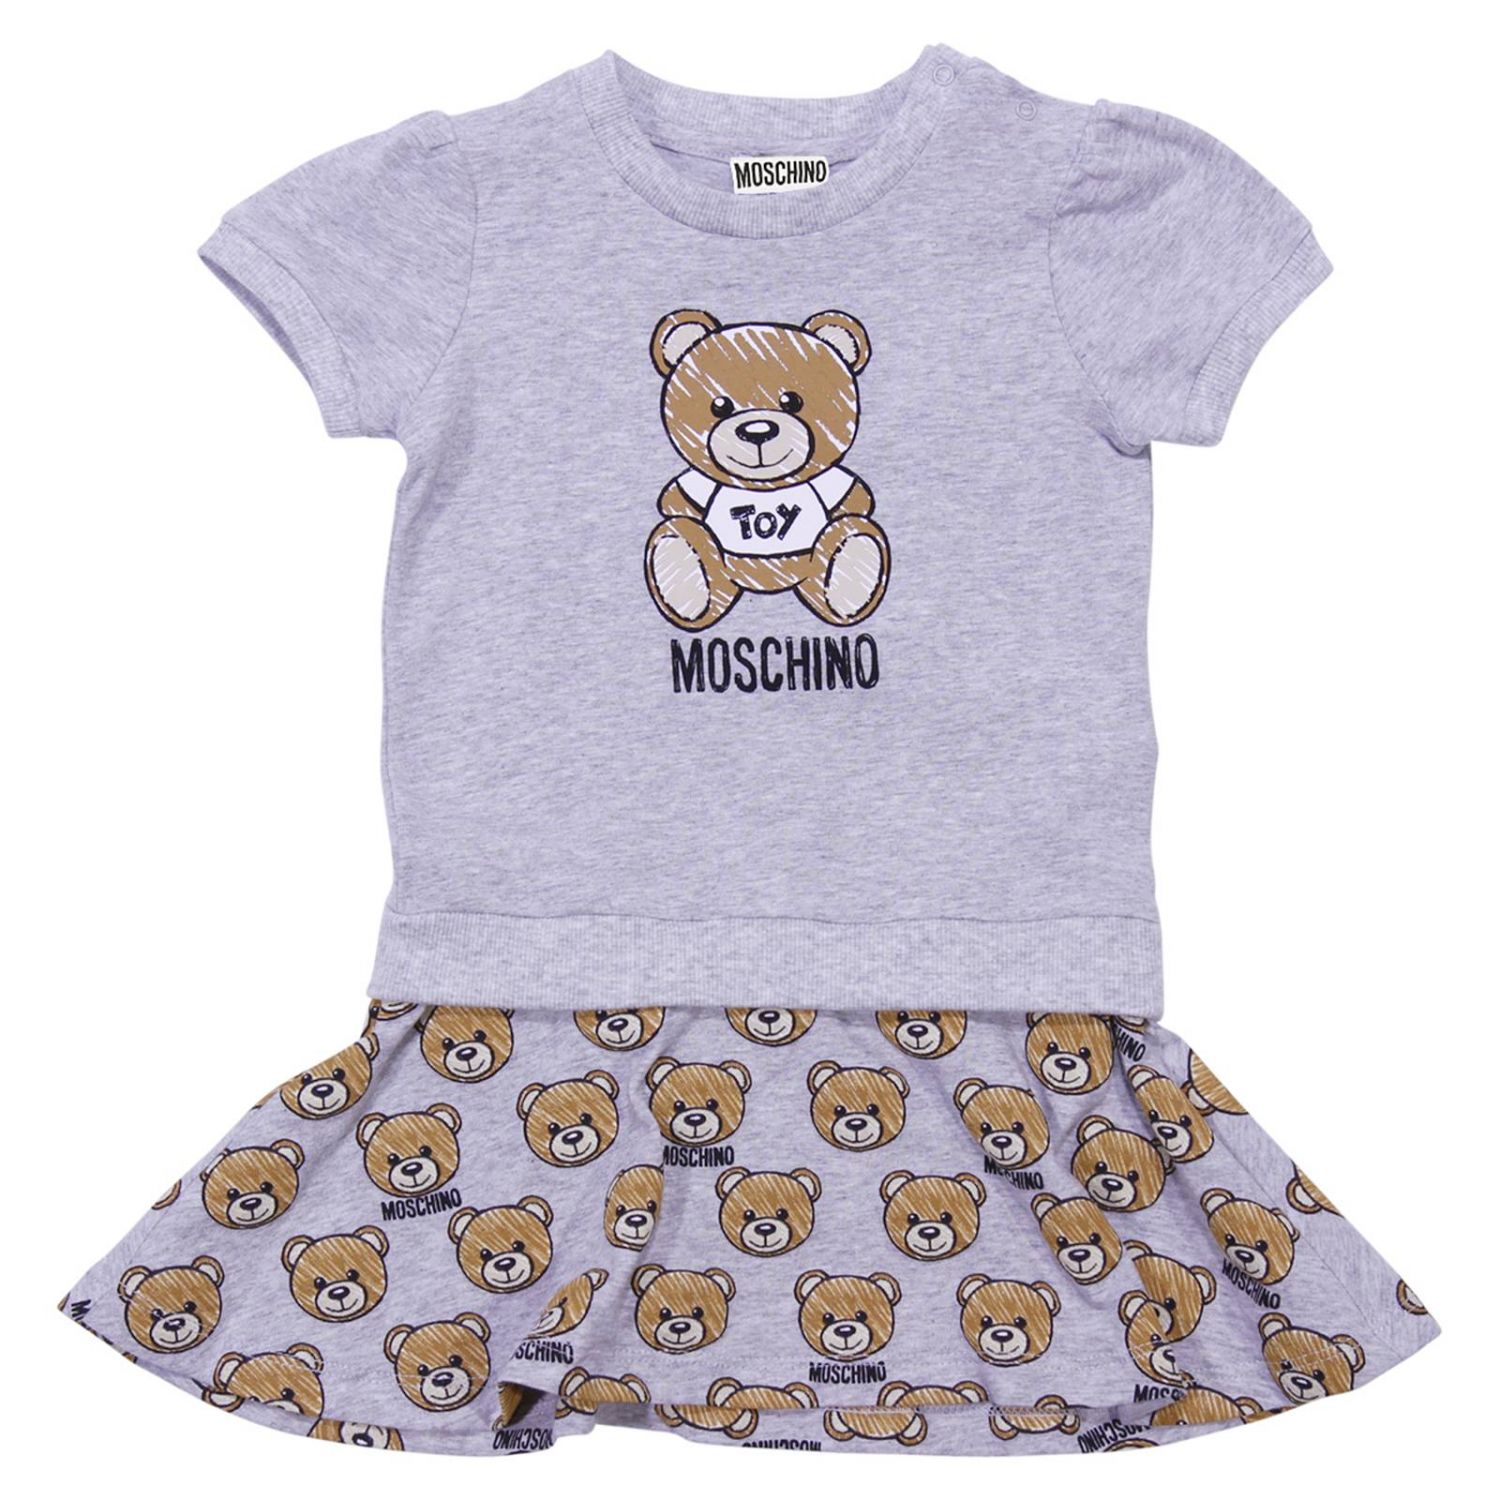 Moschino Baby Outlet: Dress kids | Dress Moschino Baby Kids Grey | Dress Moschino Baby MDV06X